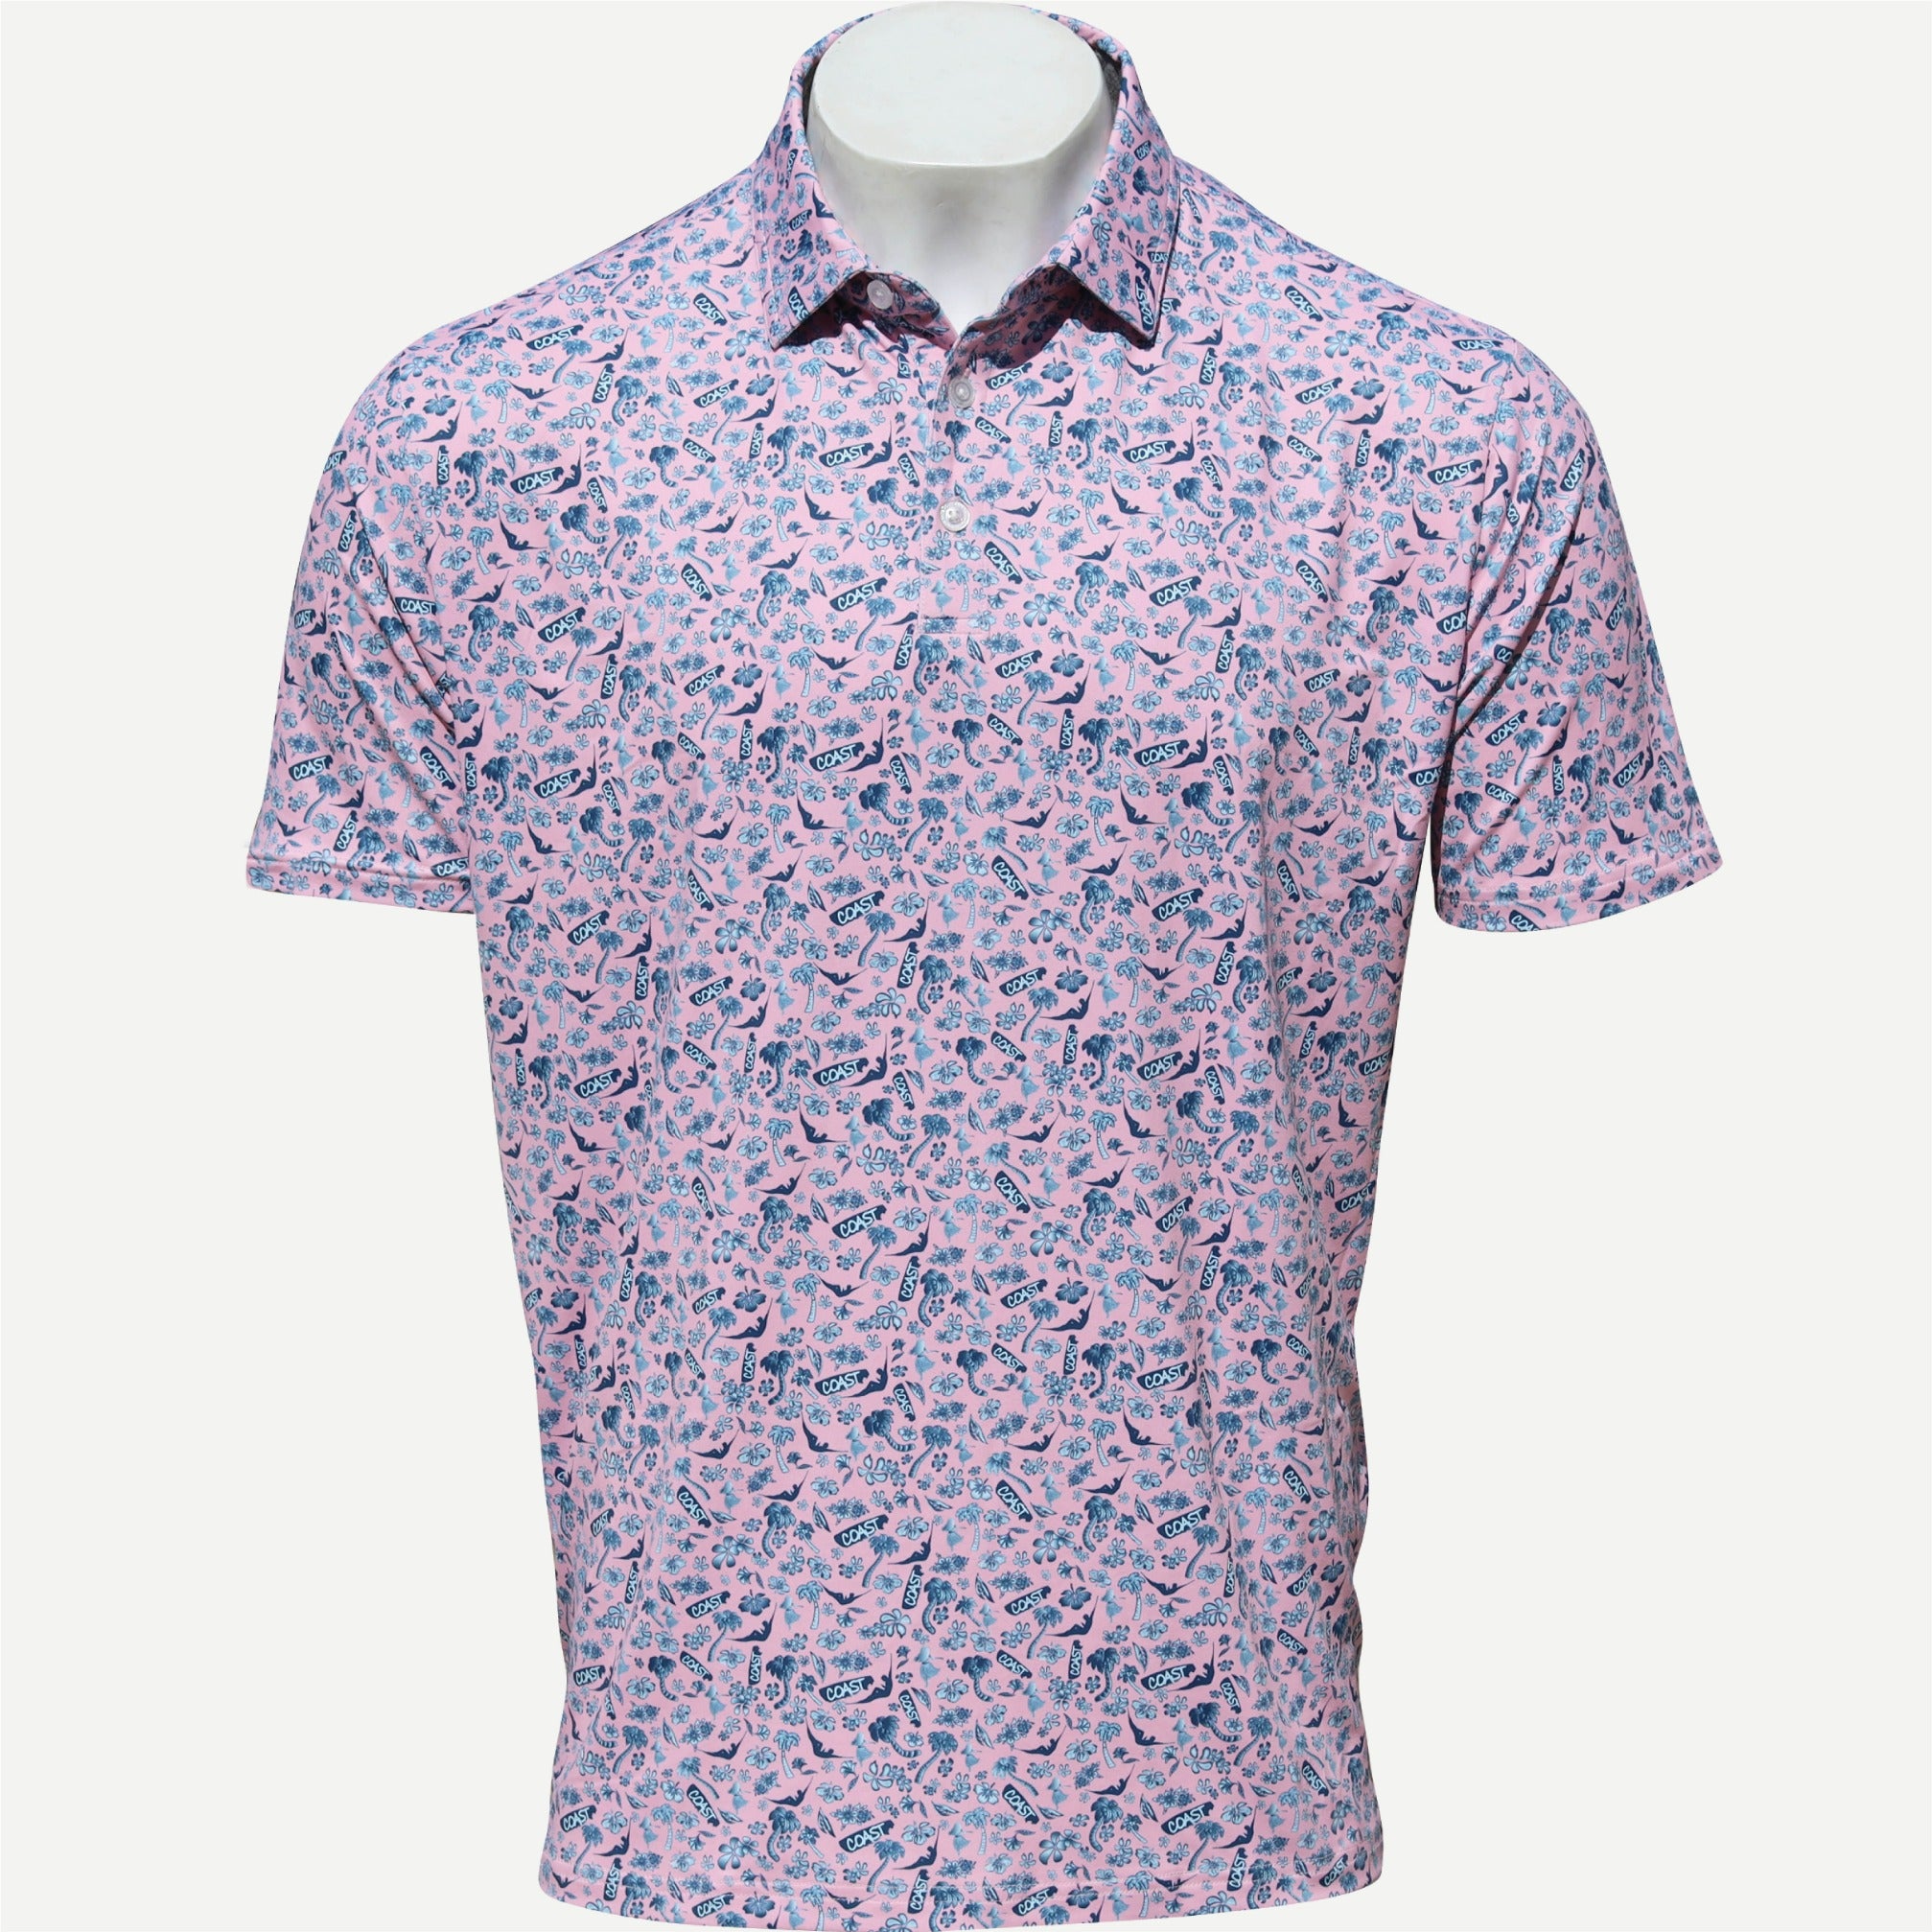 HUKILAU POLO - ORCHID PINK